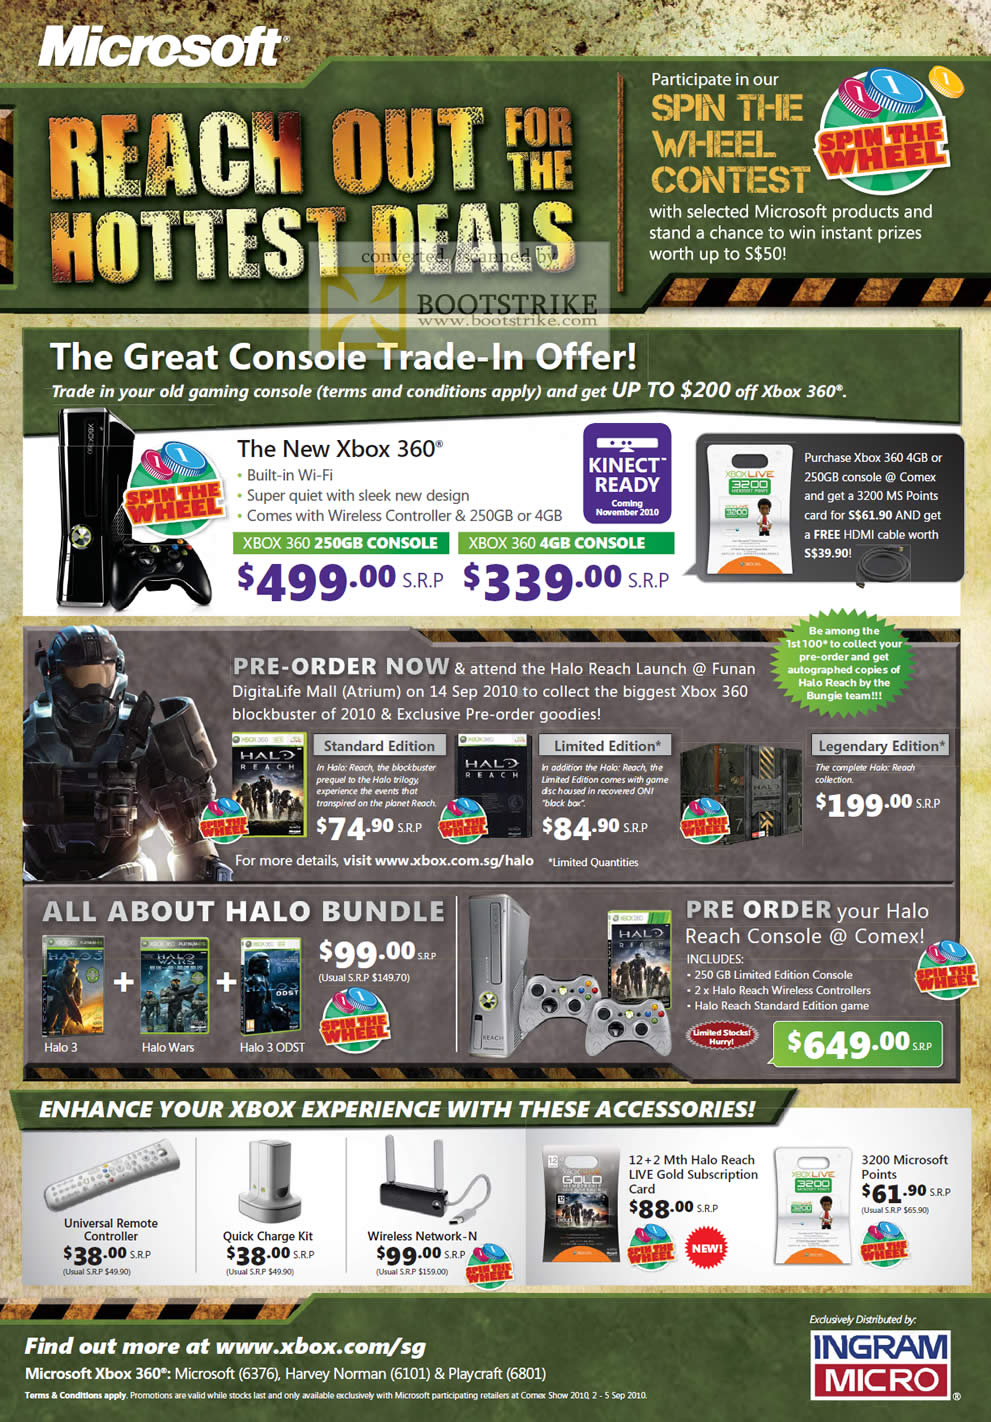 Comex 2010 price list image brochure of Microsoft Console Xbox Halo Reach Wars ODST Remote Controller Charge Kit Wireless Network Live Gold Subscription Points